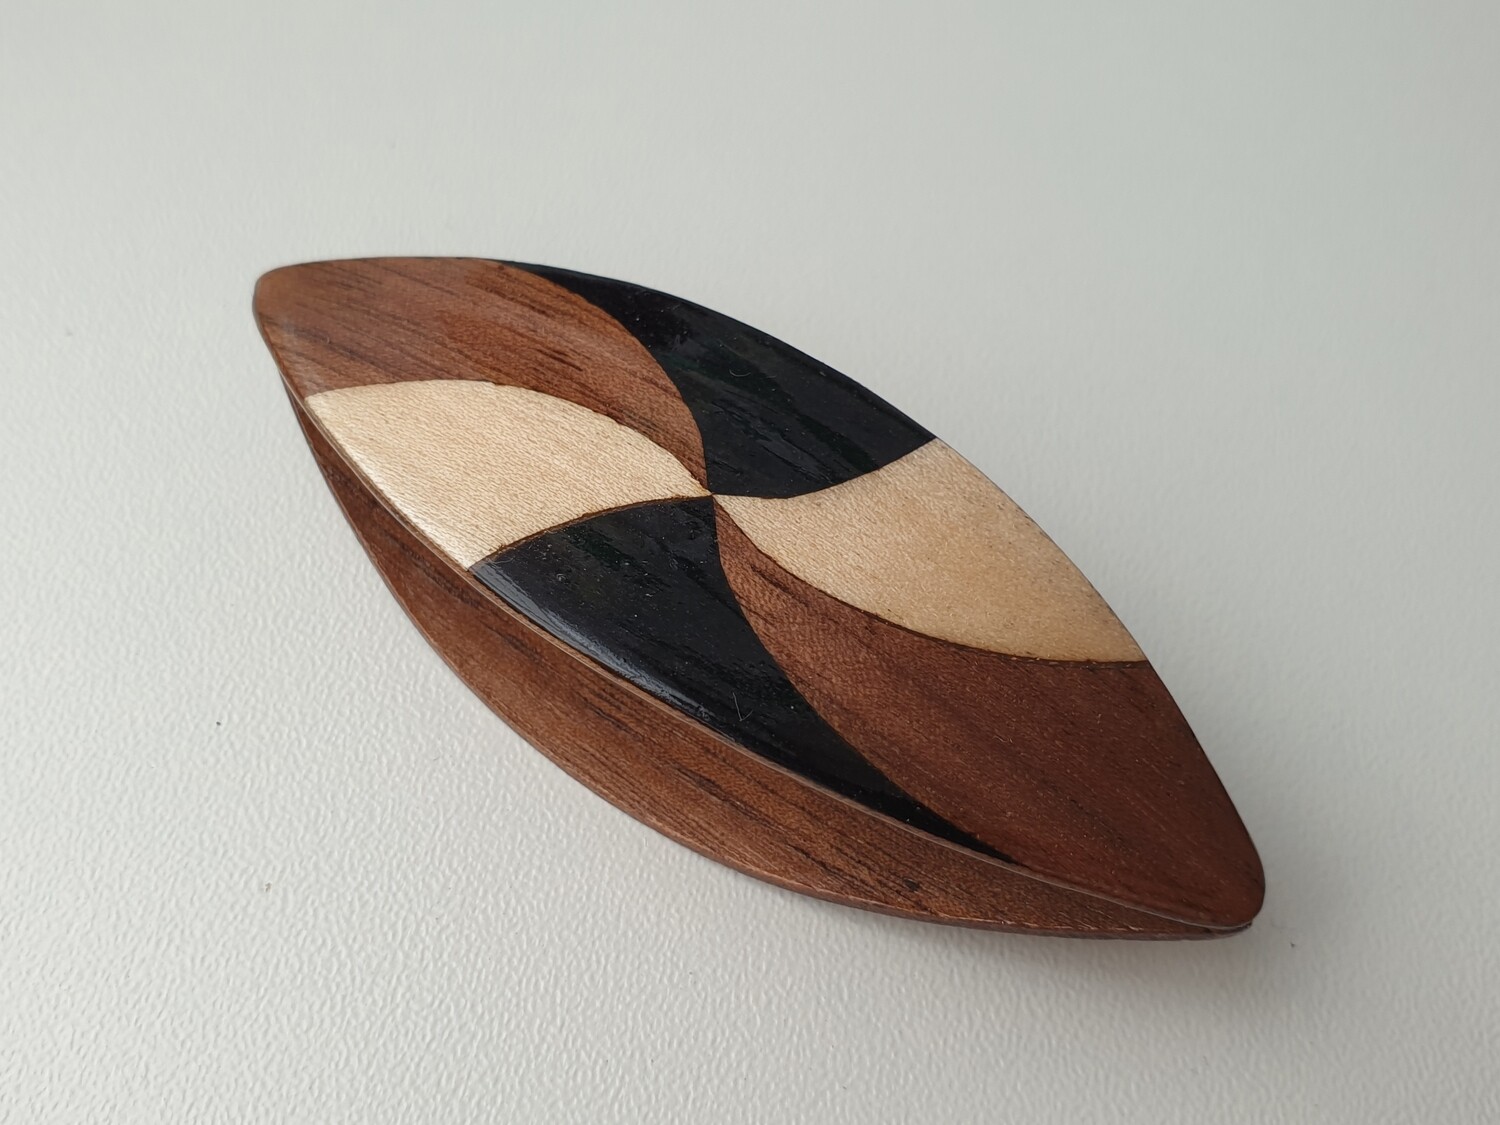 Tatting Shuttle Walnut With Maple And Black Wood Inlays